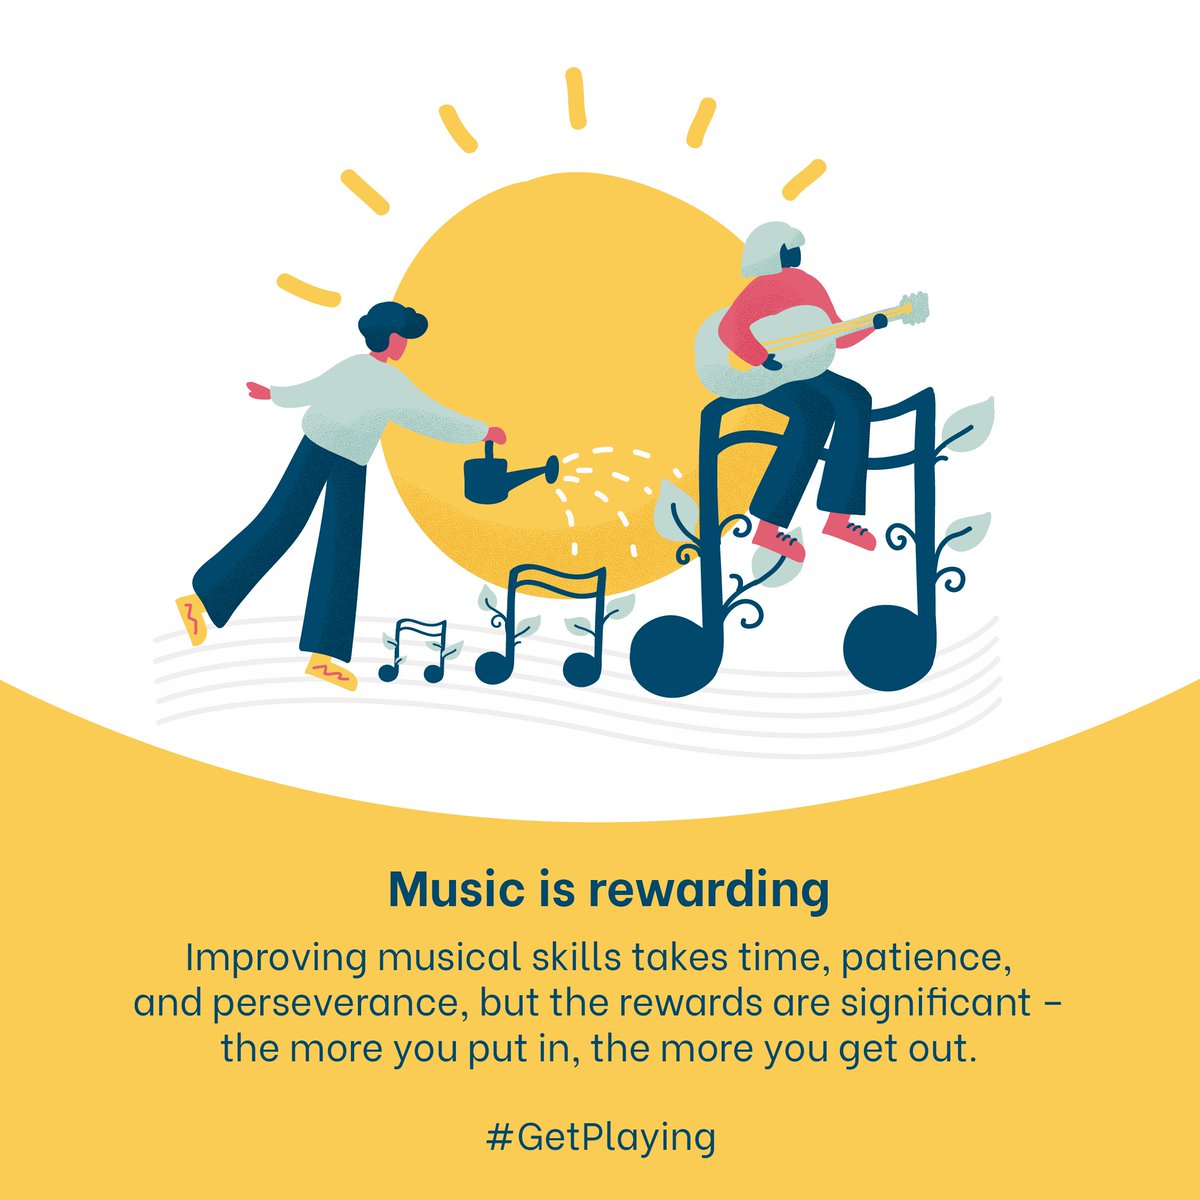 Making progress with any goal means taking things one step at a time, and music is no different. 

Whether you want to jam with friends or dream of headlining Glastonbury, RMT can help you #GetPlaying

Find out more here: richmondmusictrust.org.uk 

#MusicEducation #Richmond